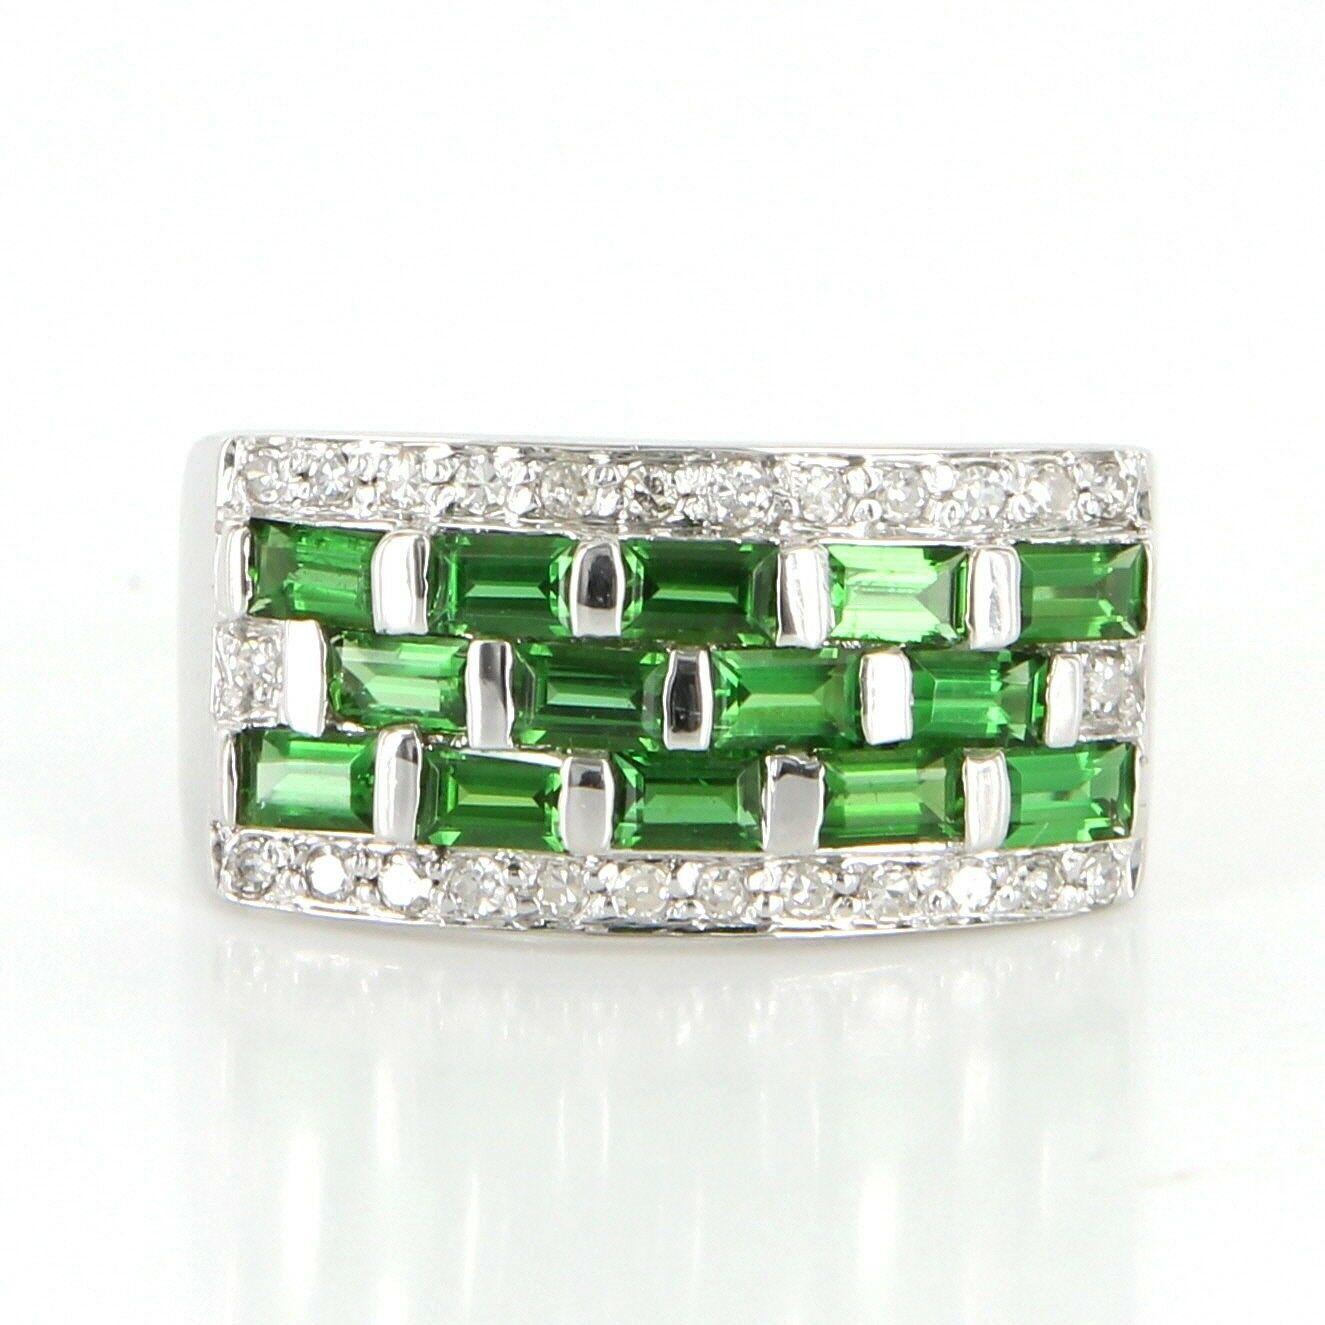 Offered for sale is a truly superb vintage cocktail right hand ring, crafted beautifully in 14 karat white gold.

The band is set with emerald cut tsavorite garnet totaling 1.12 carats estimated and an estimated .23 carat single cut diamonds in an